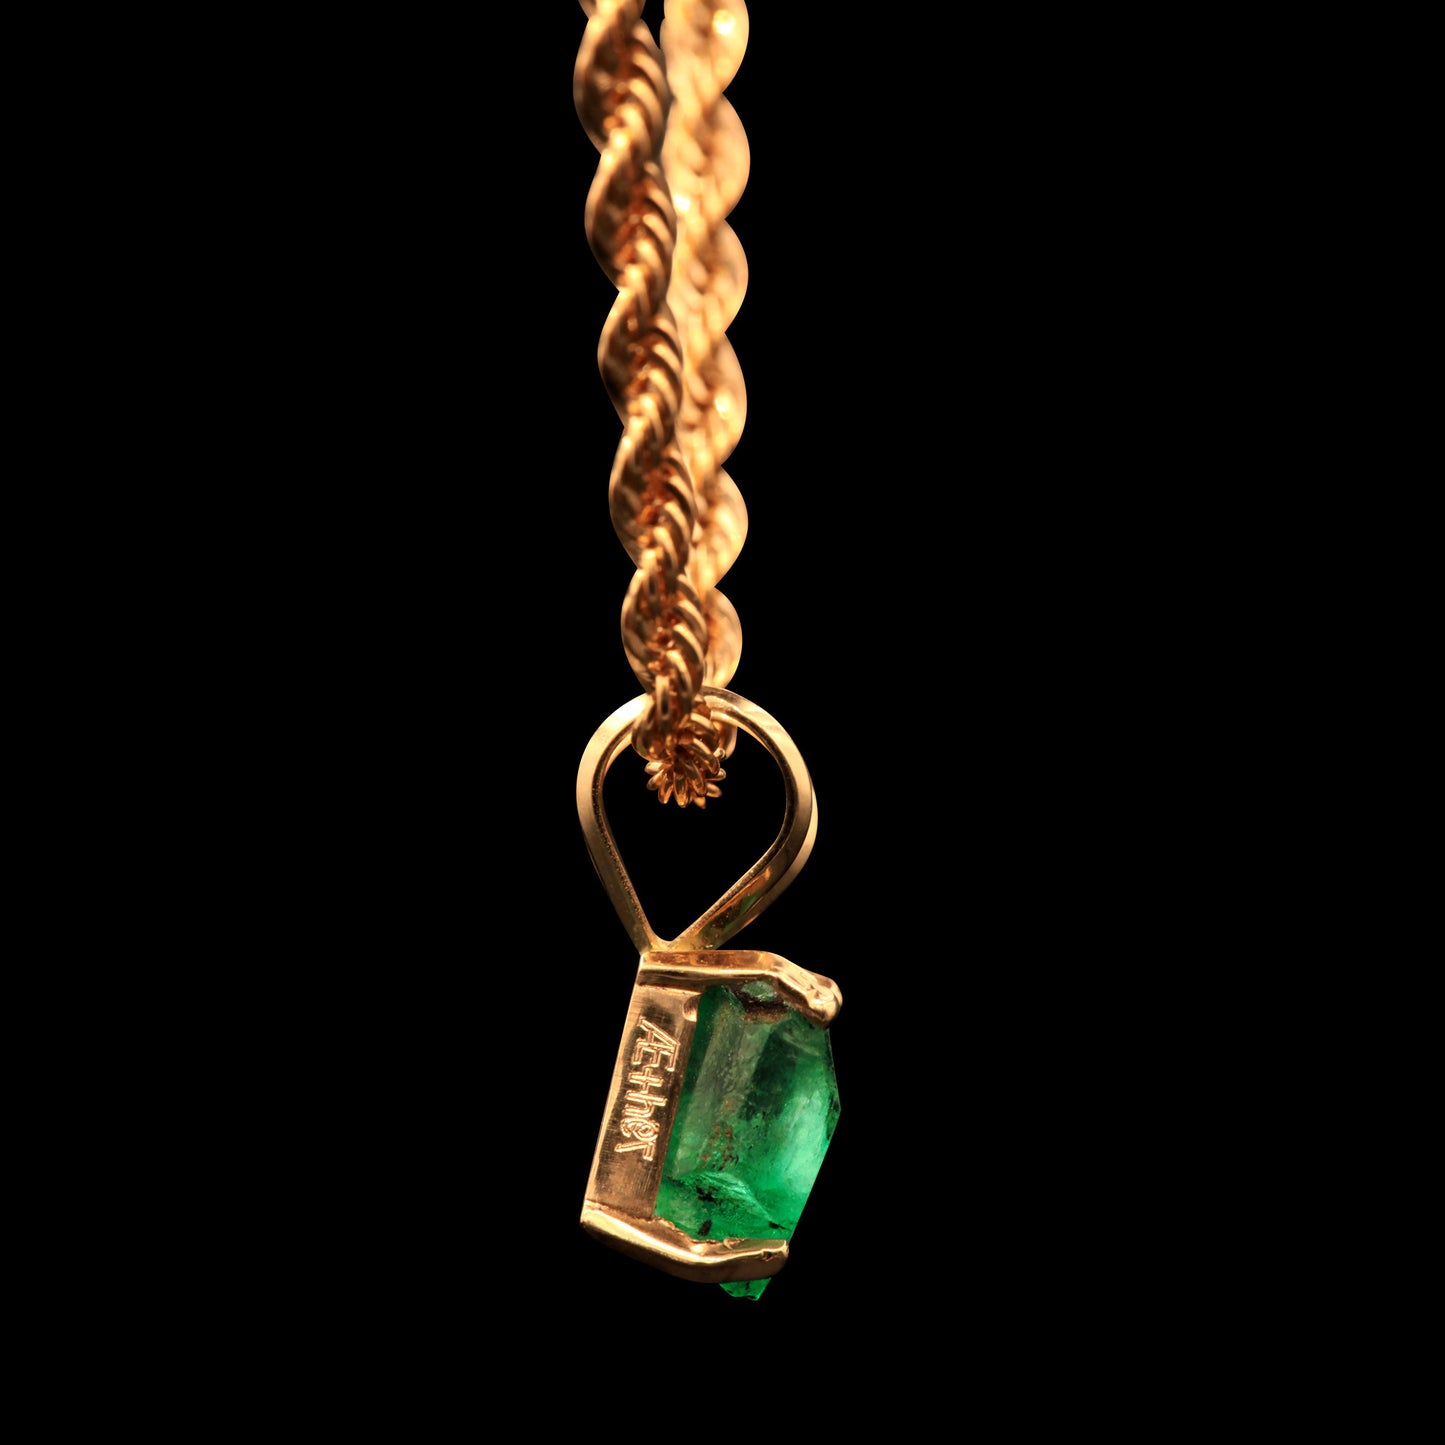 2.35 CARAT NATURAL UNTREATED COLOMBIAN EMERALD GEM ON 14K ROPE